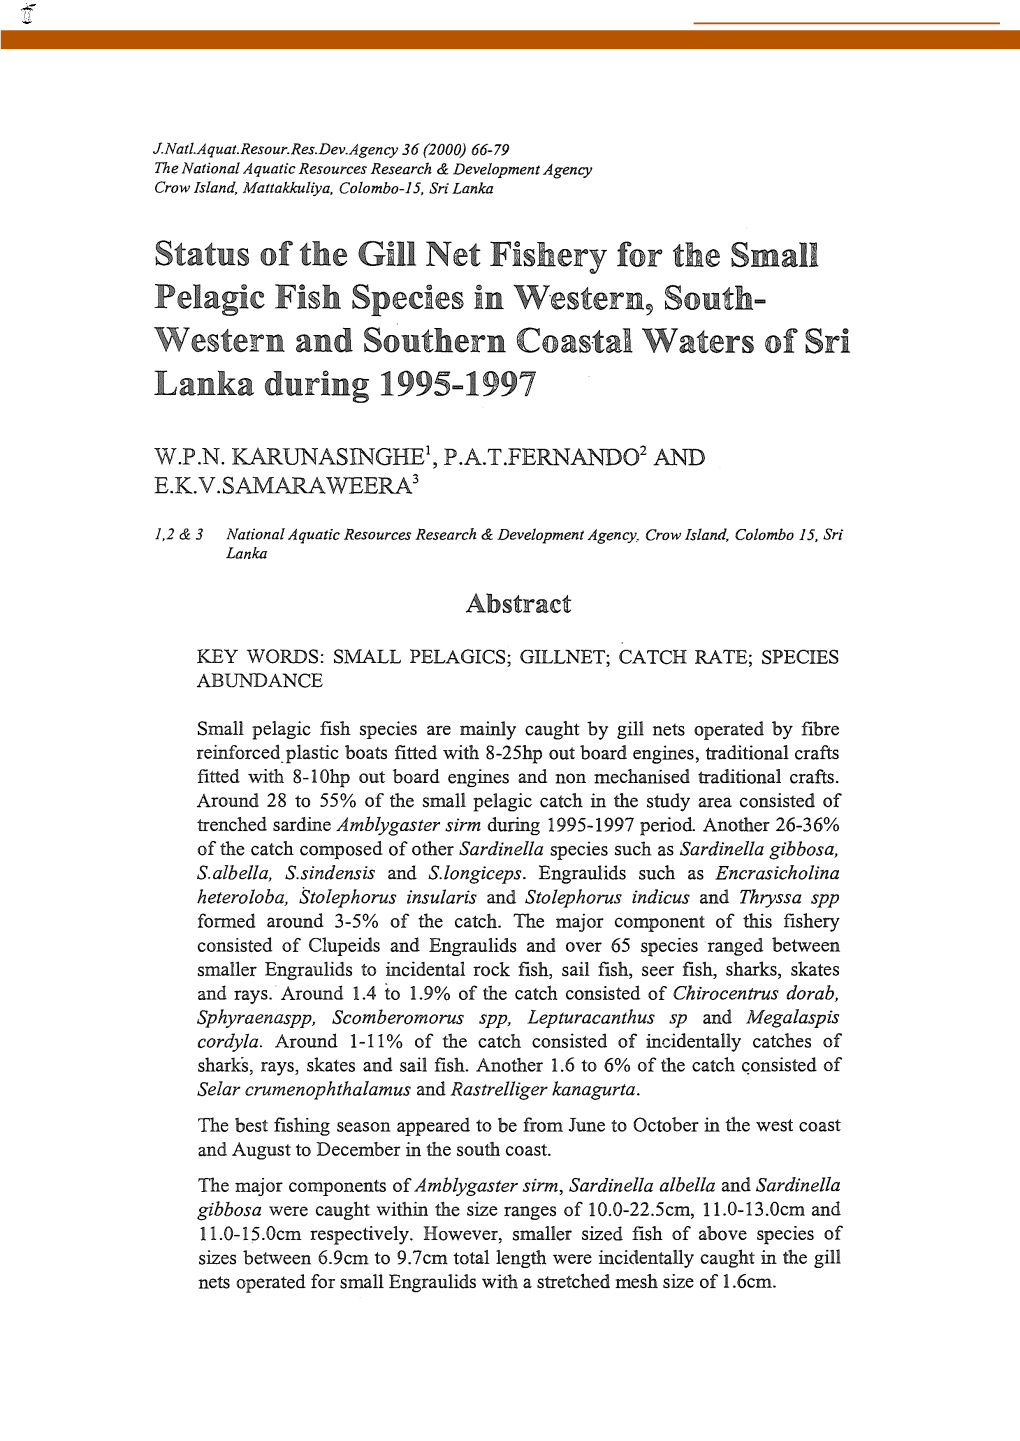 Status of the Gill Net Fishery for the Small Pelagic Fish Species in W·Estern, South­ Western and Southern Coastal Waters of Sri Lanka During 1995-1997